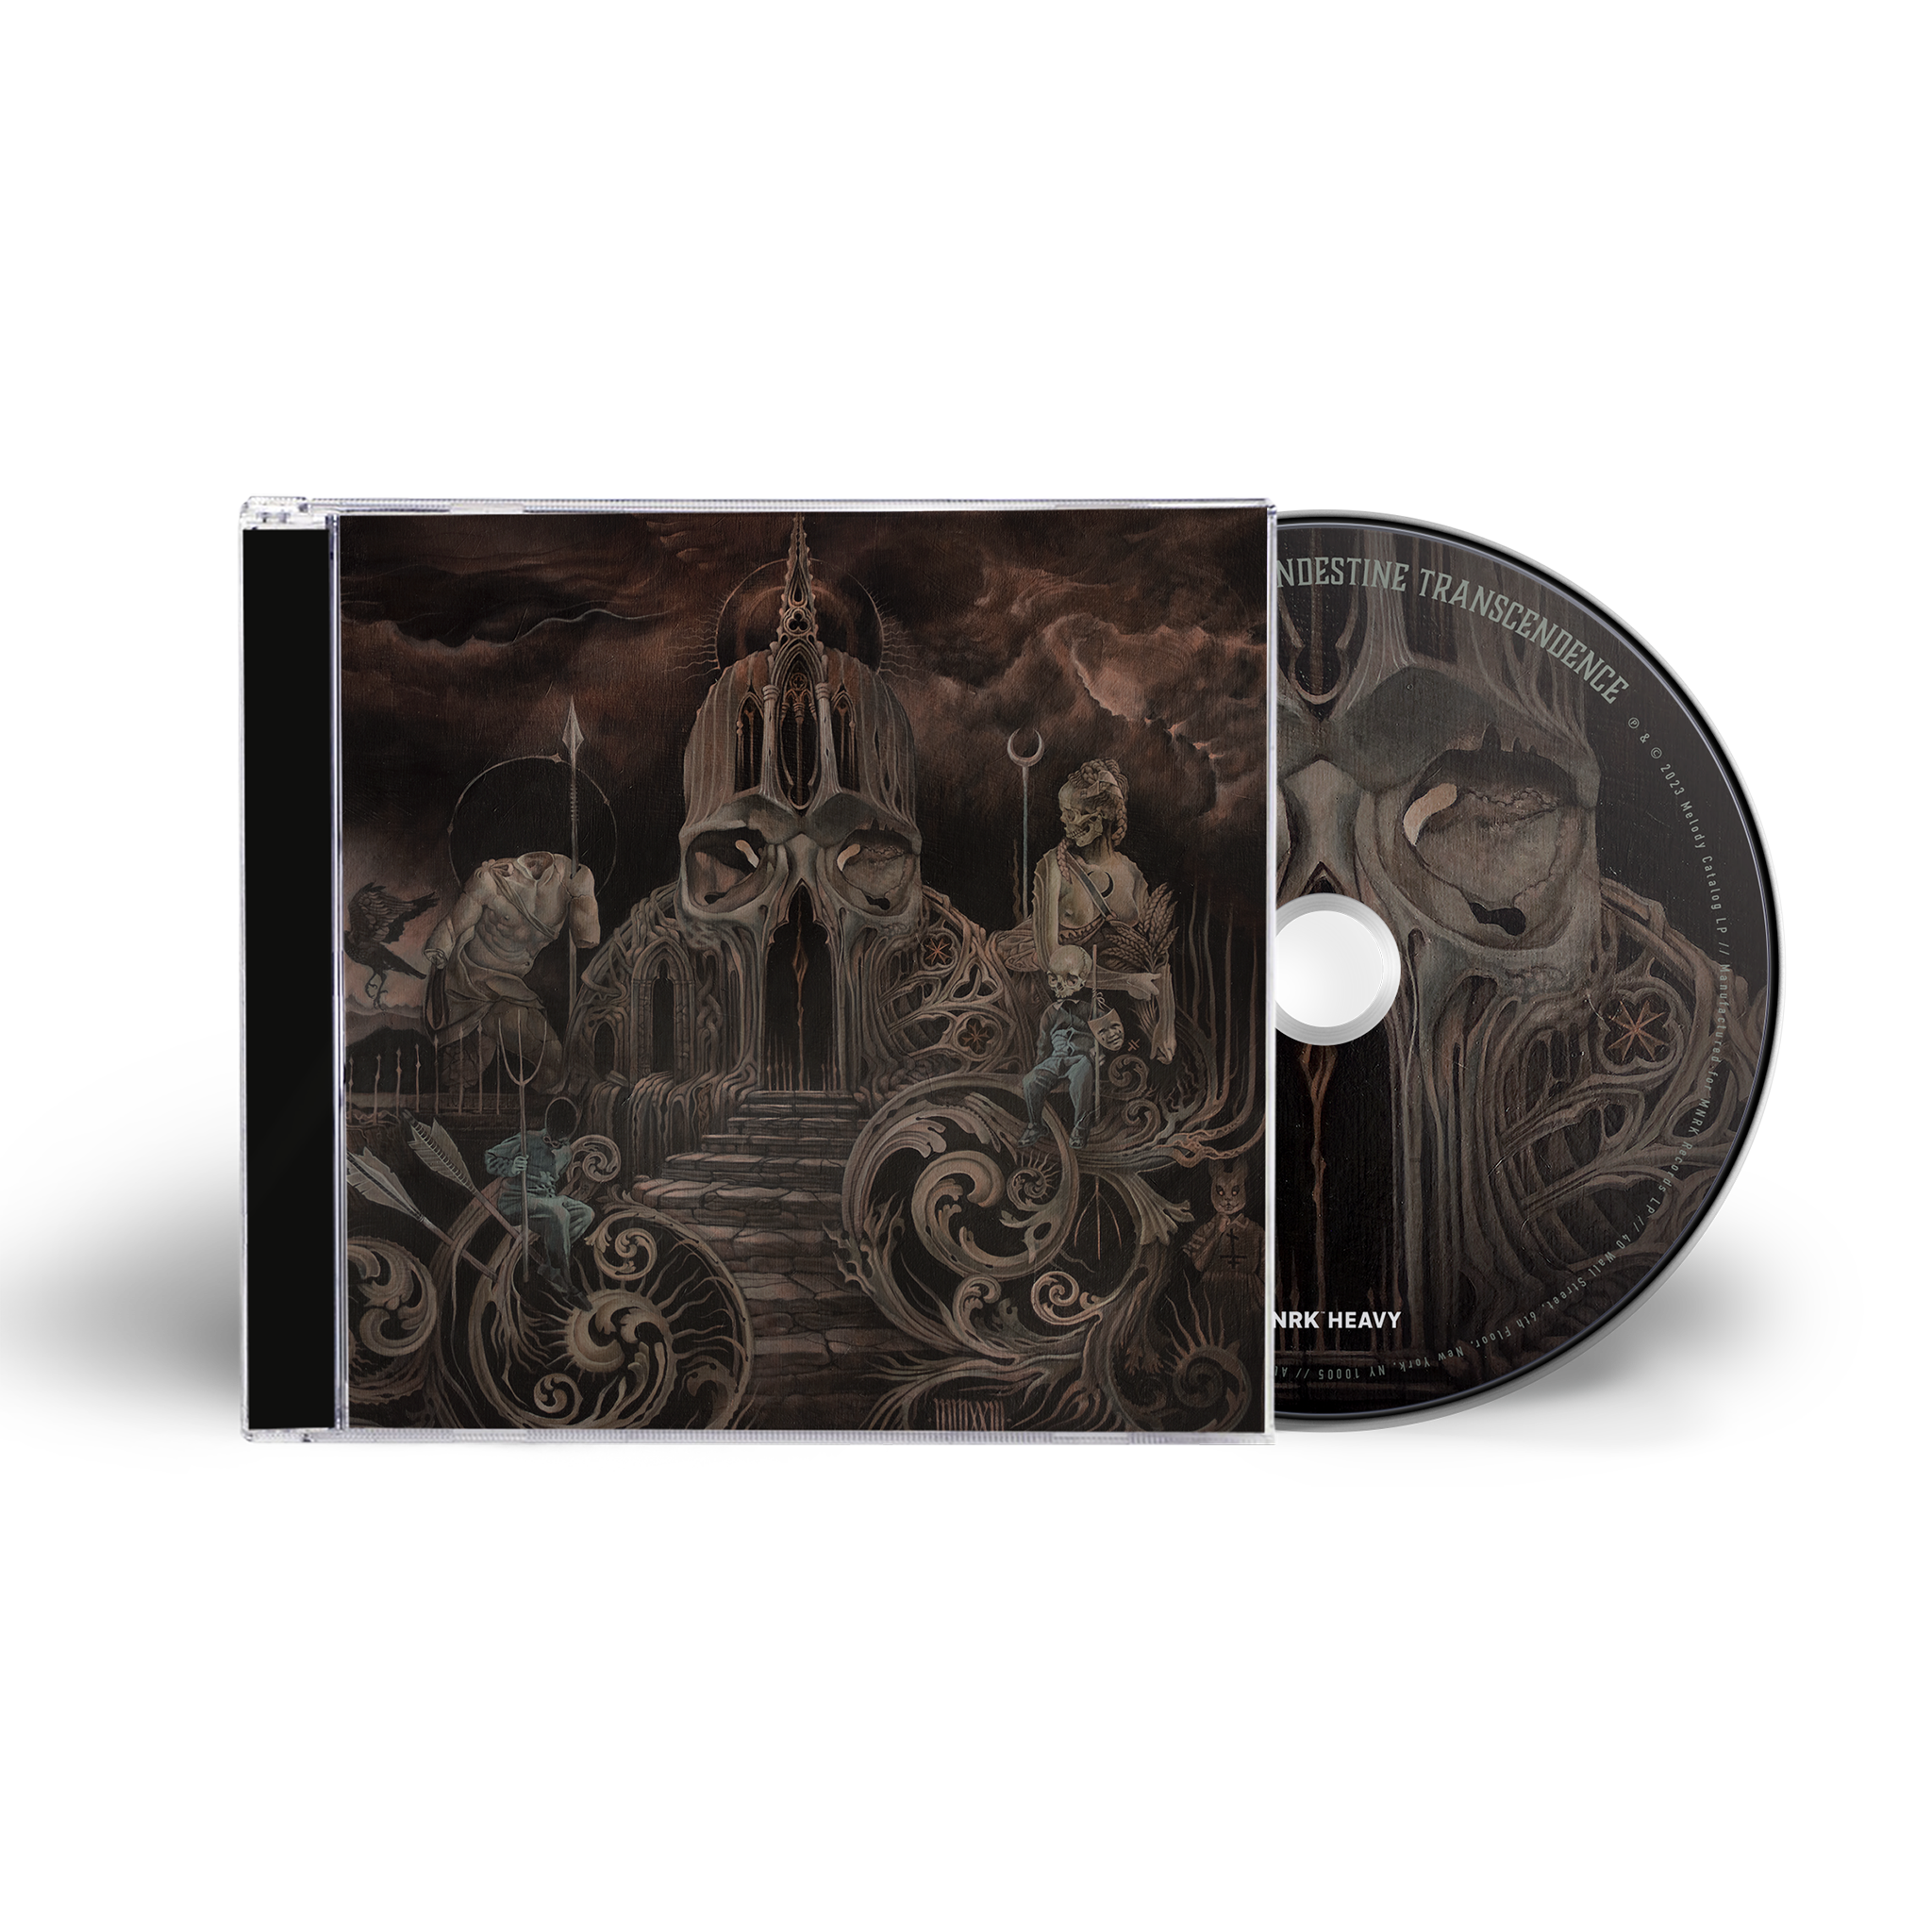 Lord Dying "Clandestine Transcendence" CD